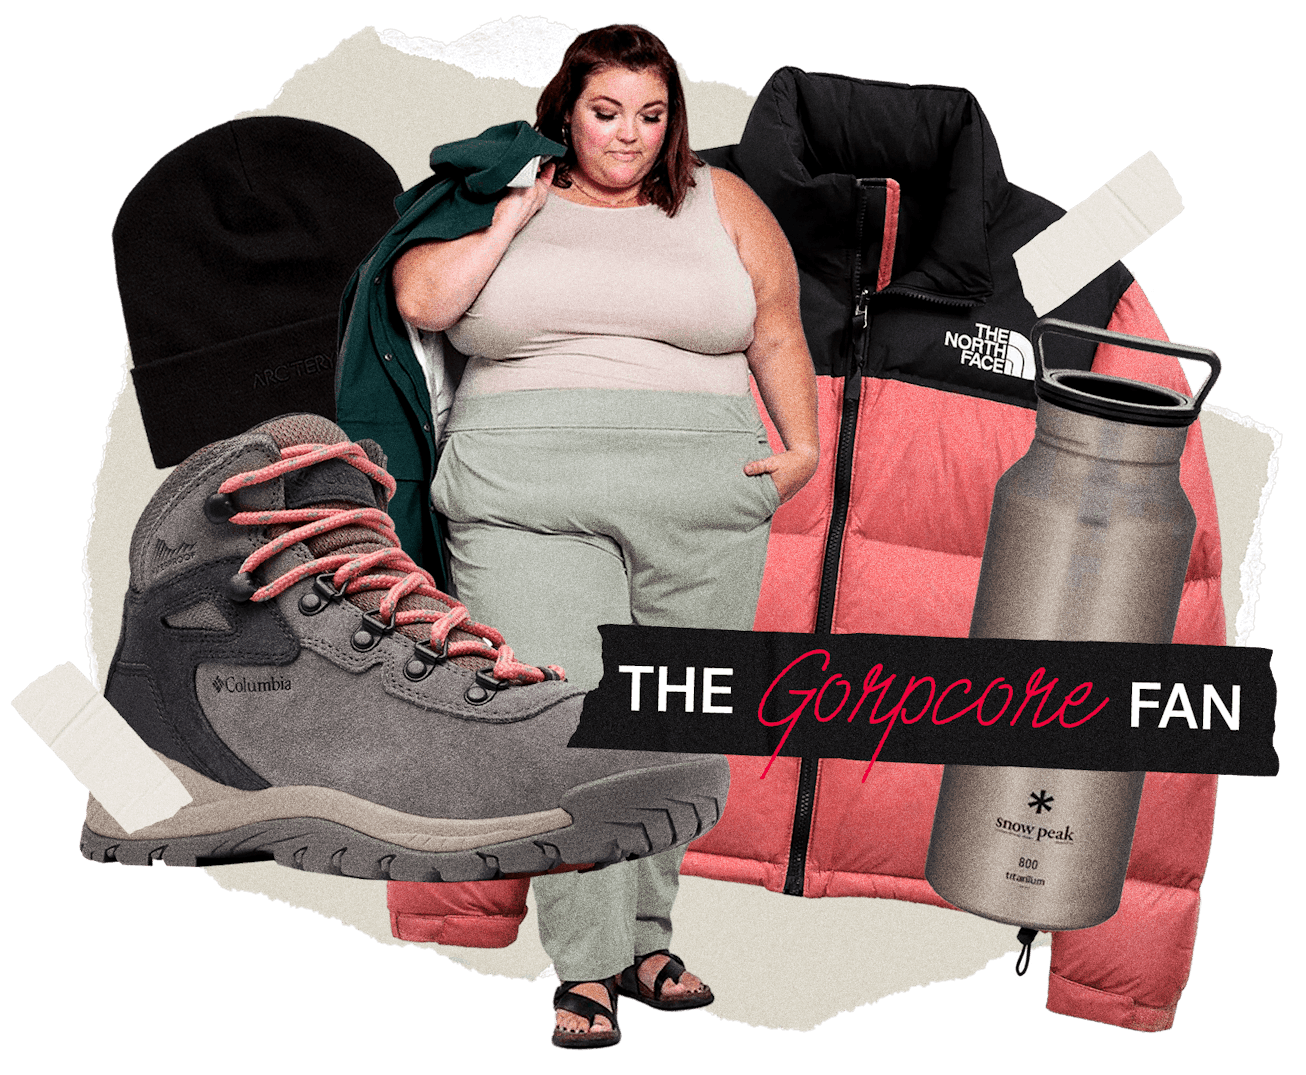 Perfect outdoor items to gift to a gorpcore fan